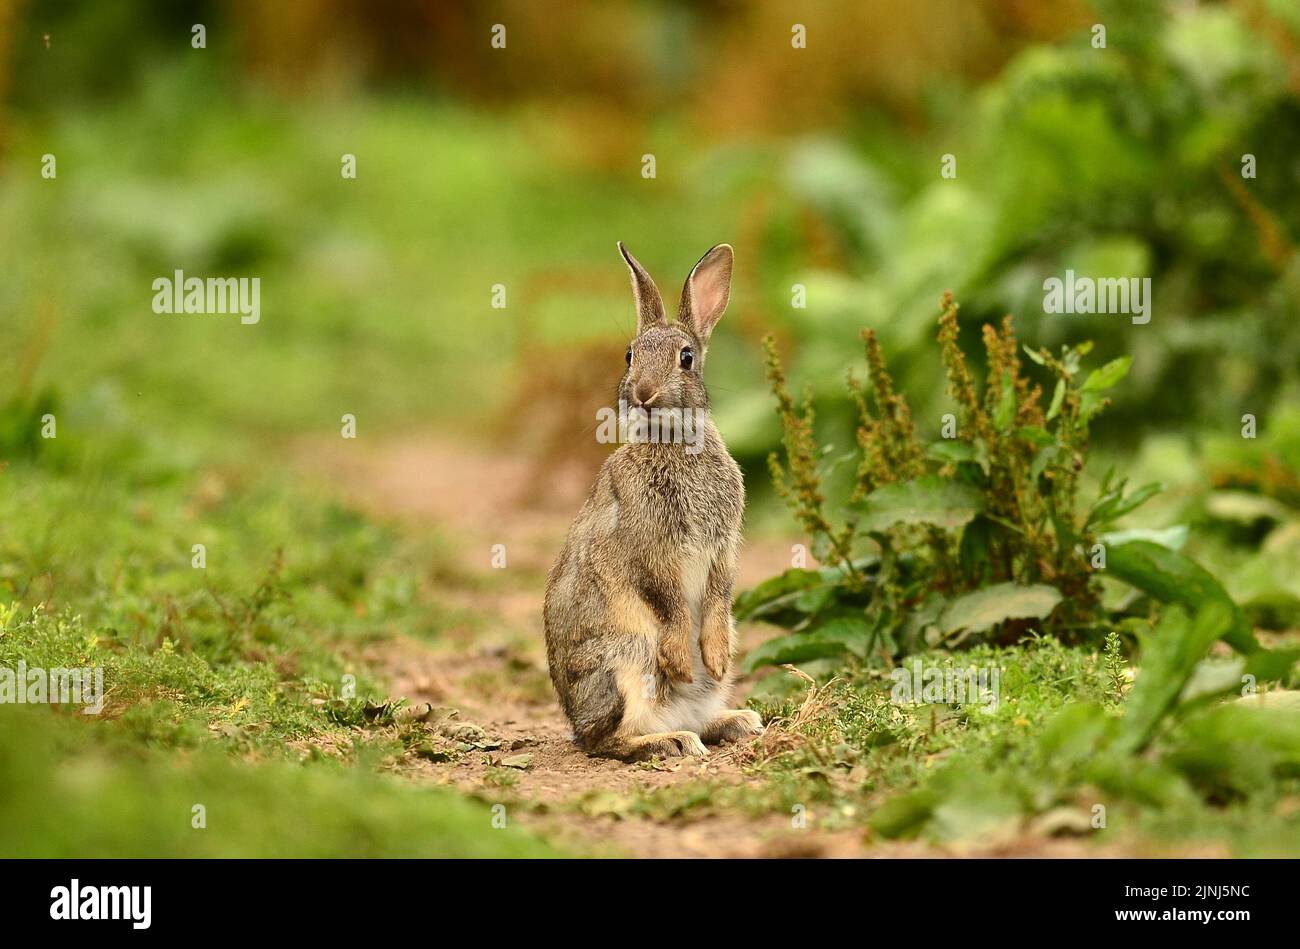 Young rabbit standing on hind feet in alert posture Stock Photo